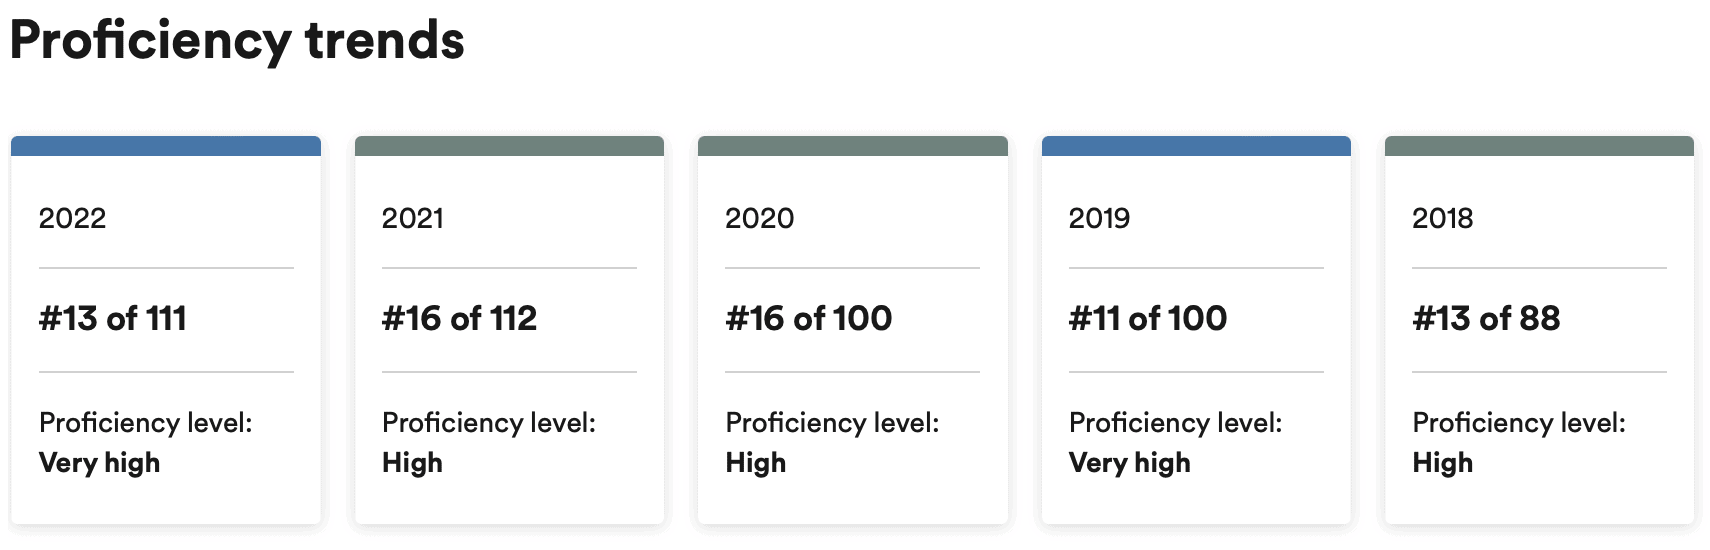 English Proficiency Index for Poland since 2018